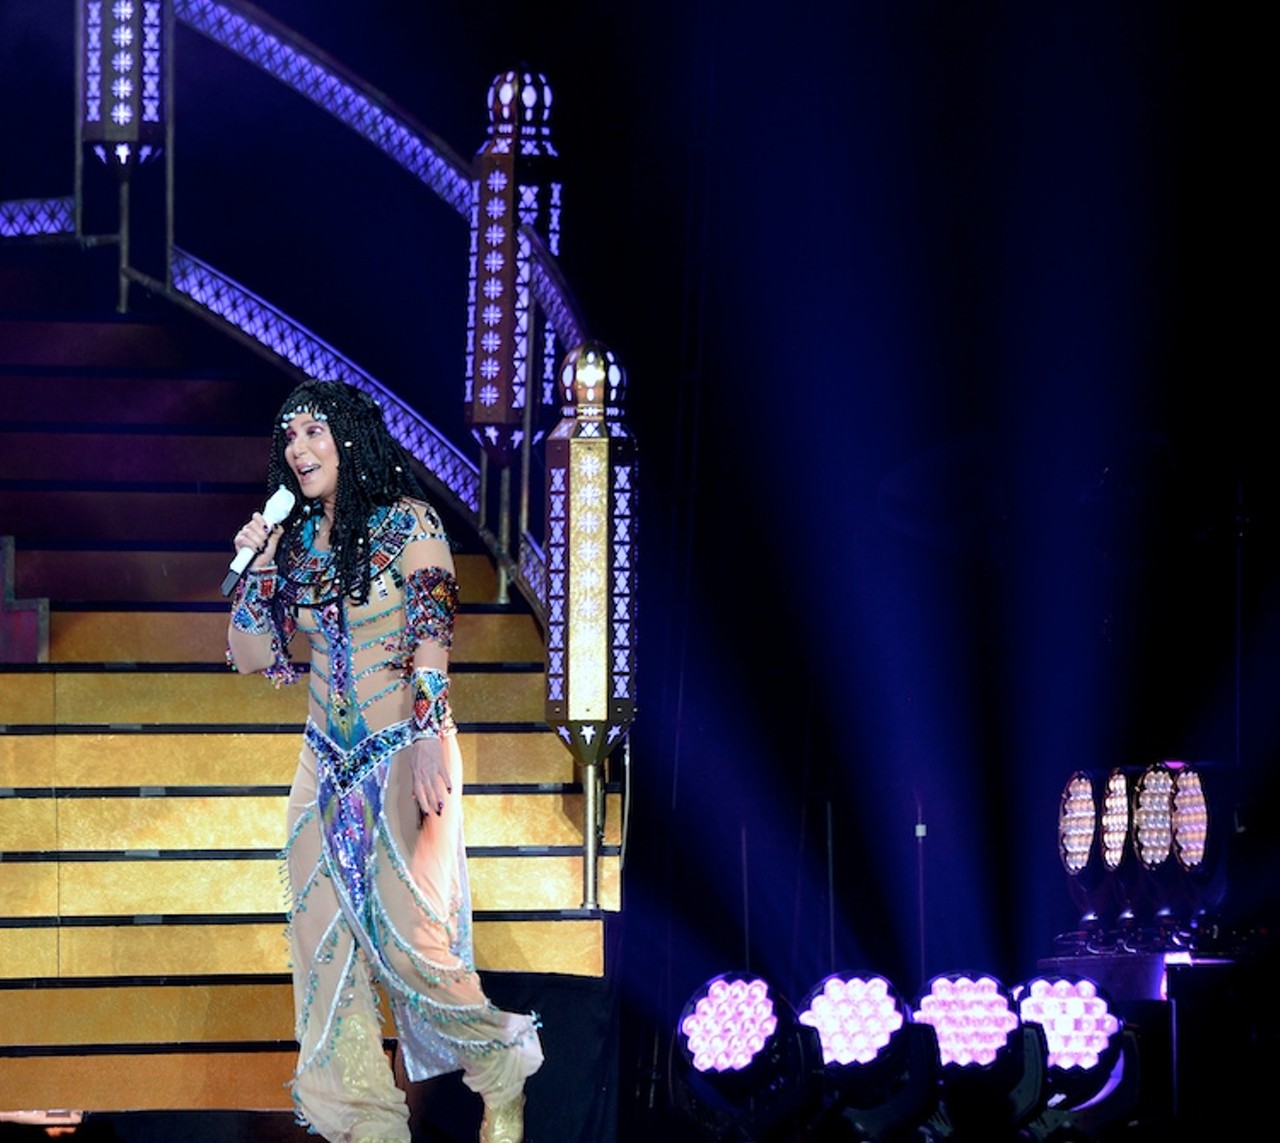 Cher and Cyndi Lauper Performing at Quicken Loans Arena